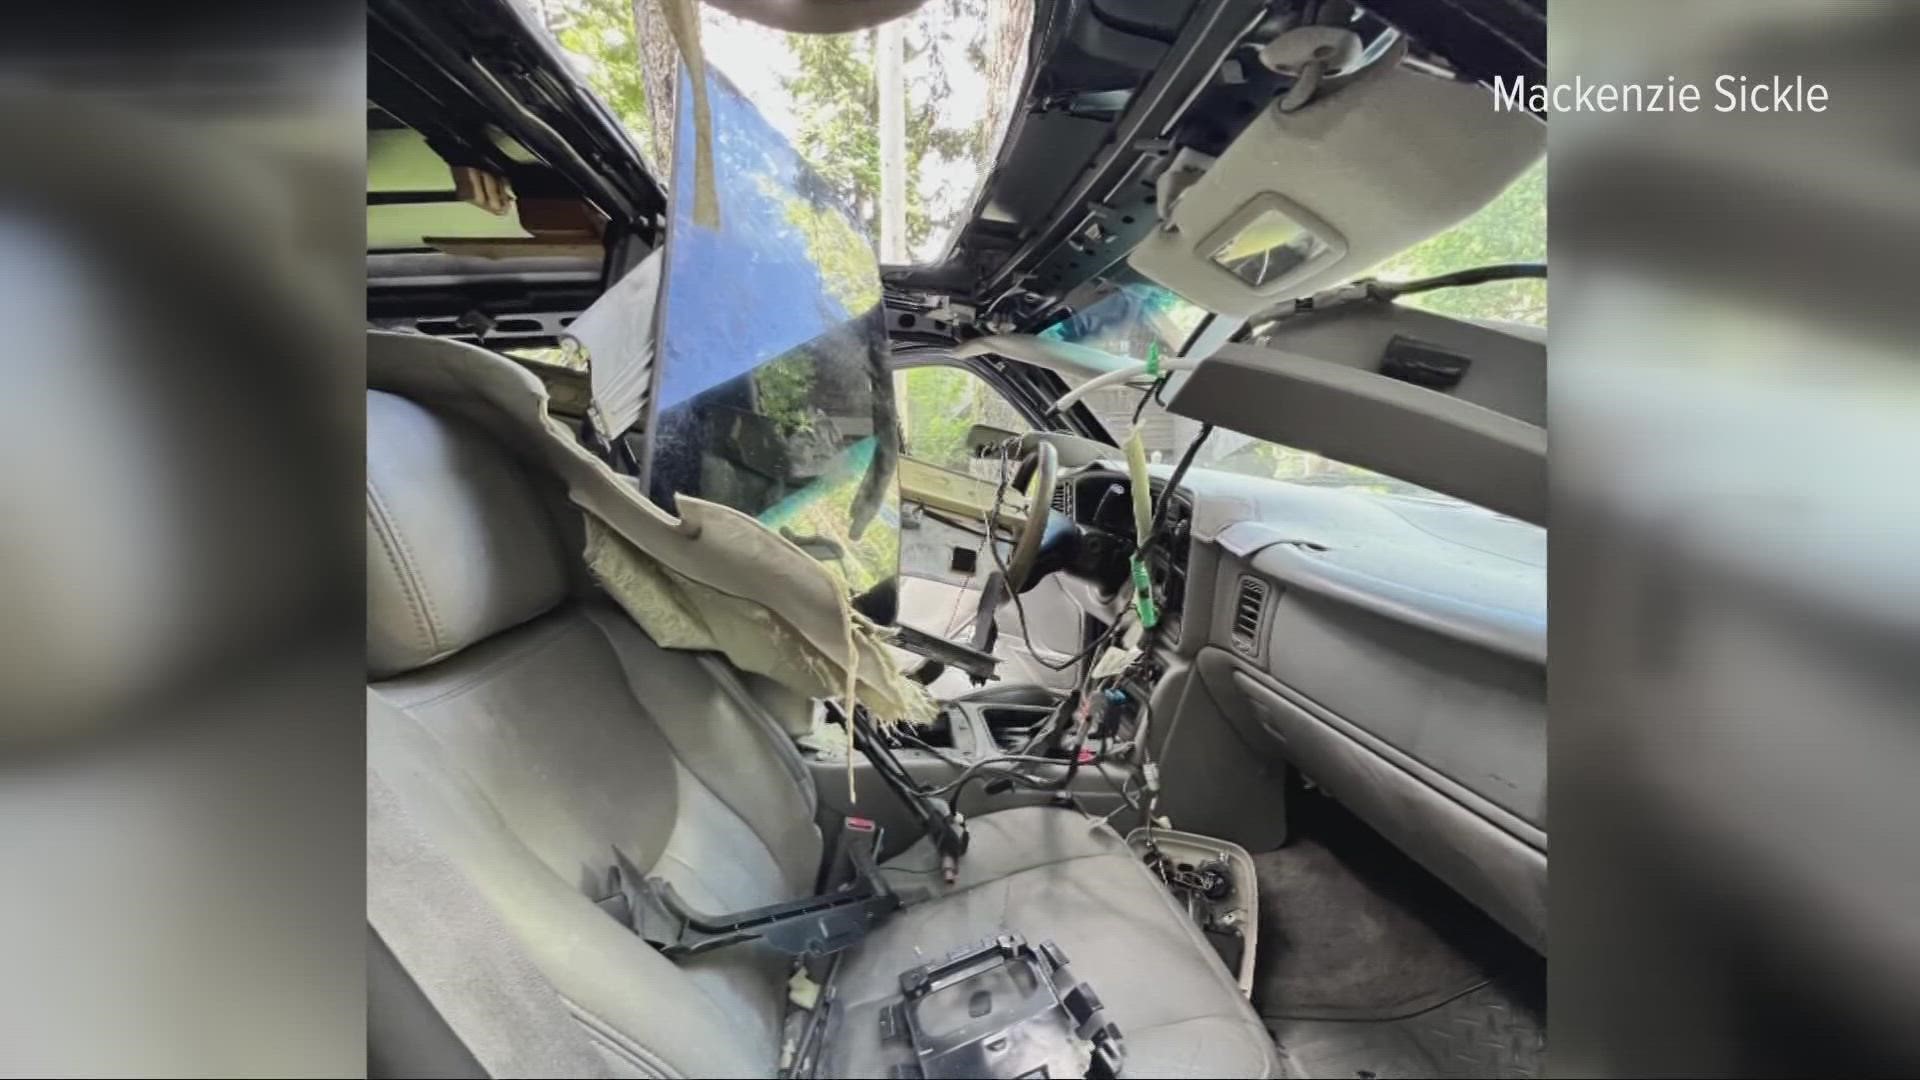 One family up in Lake Tahoe faced a bear attack, not on them, but on their Sierra truck. The car's interior was all tore up, and the family has the footage.